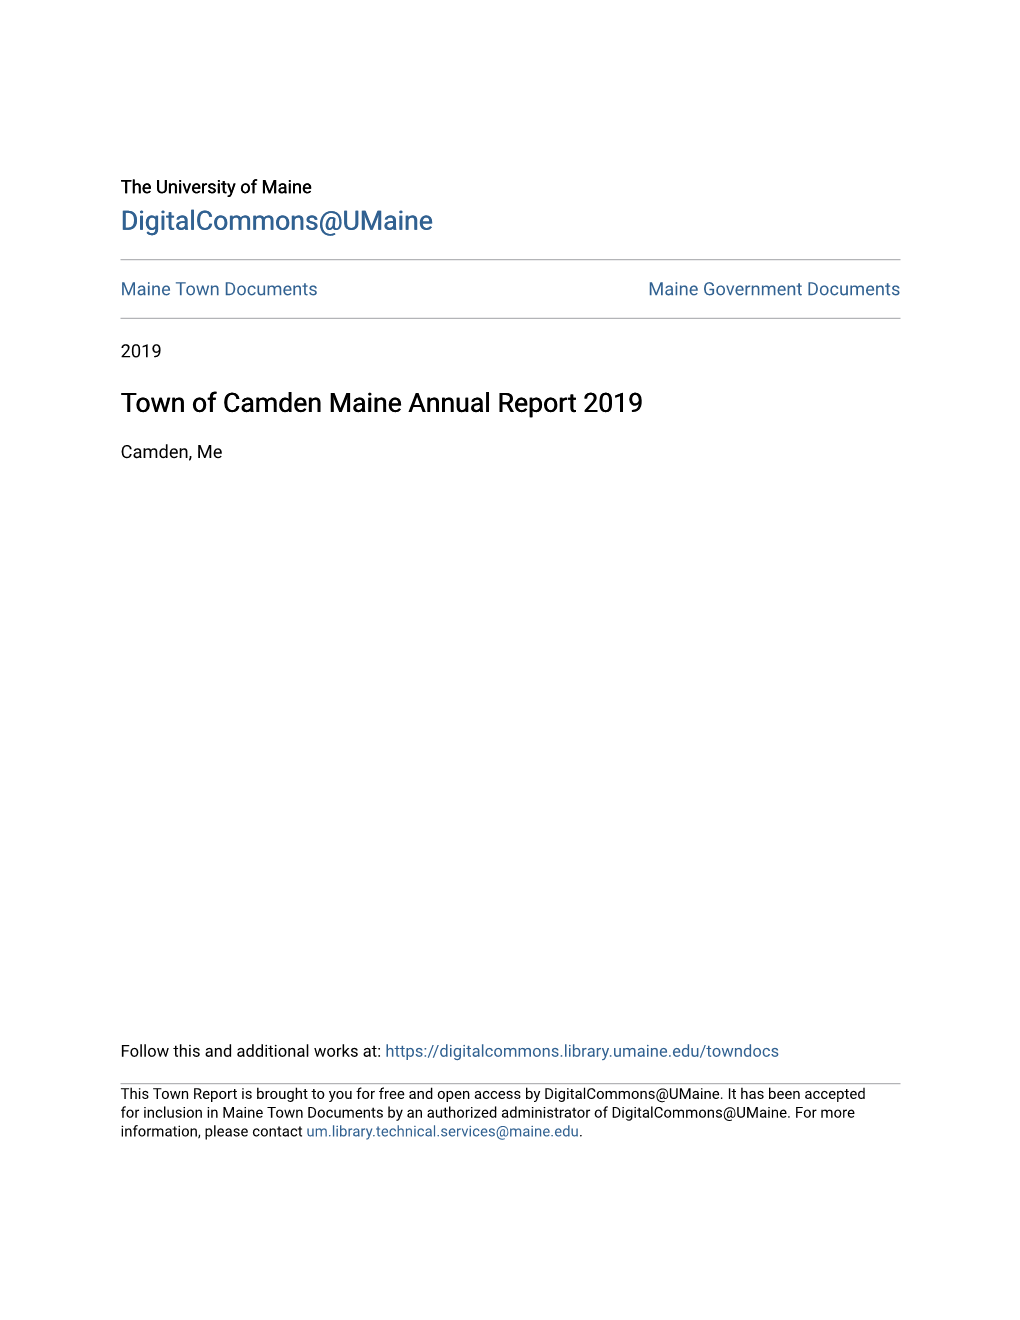 Town of Camden Maine Annual Report 2019